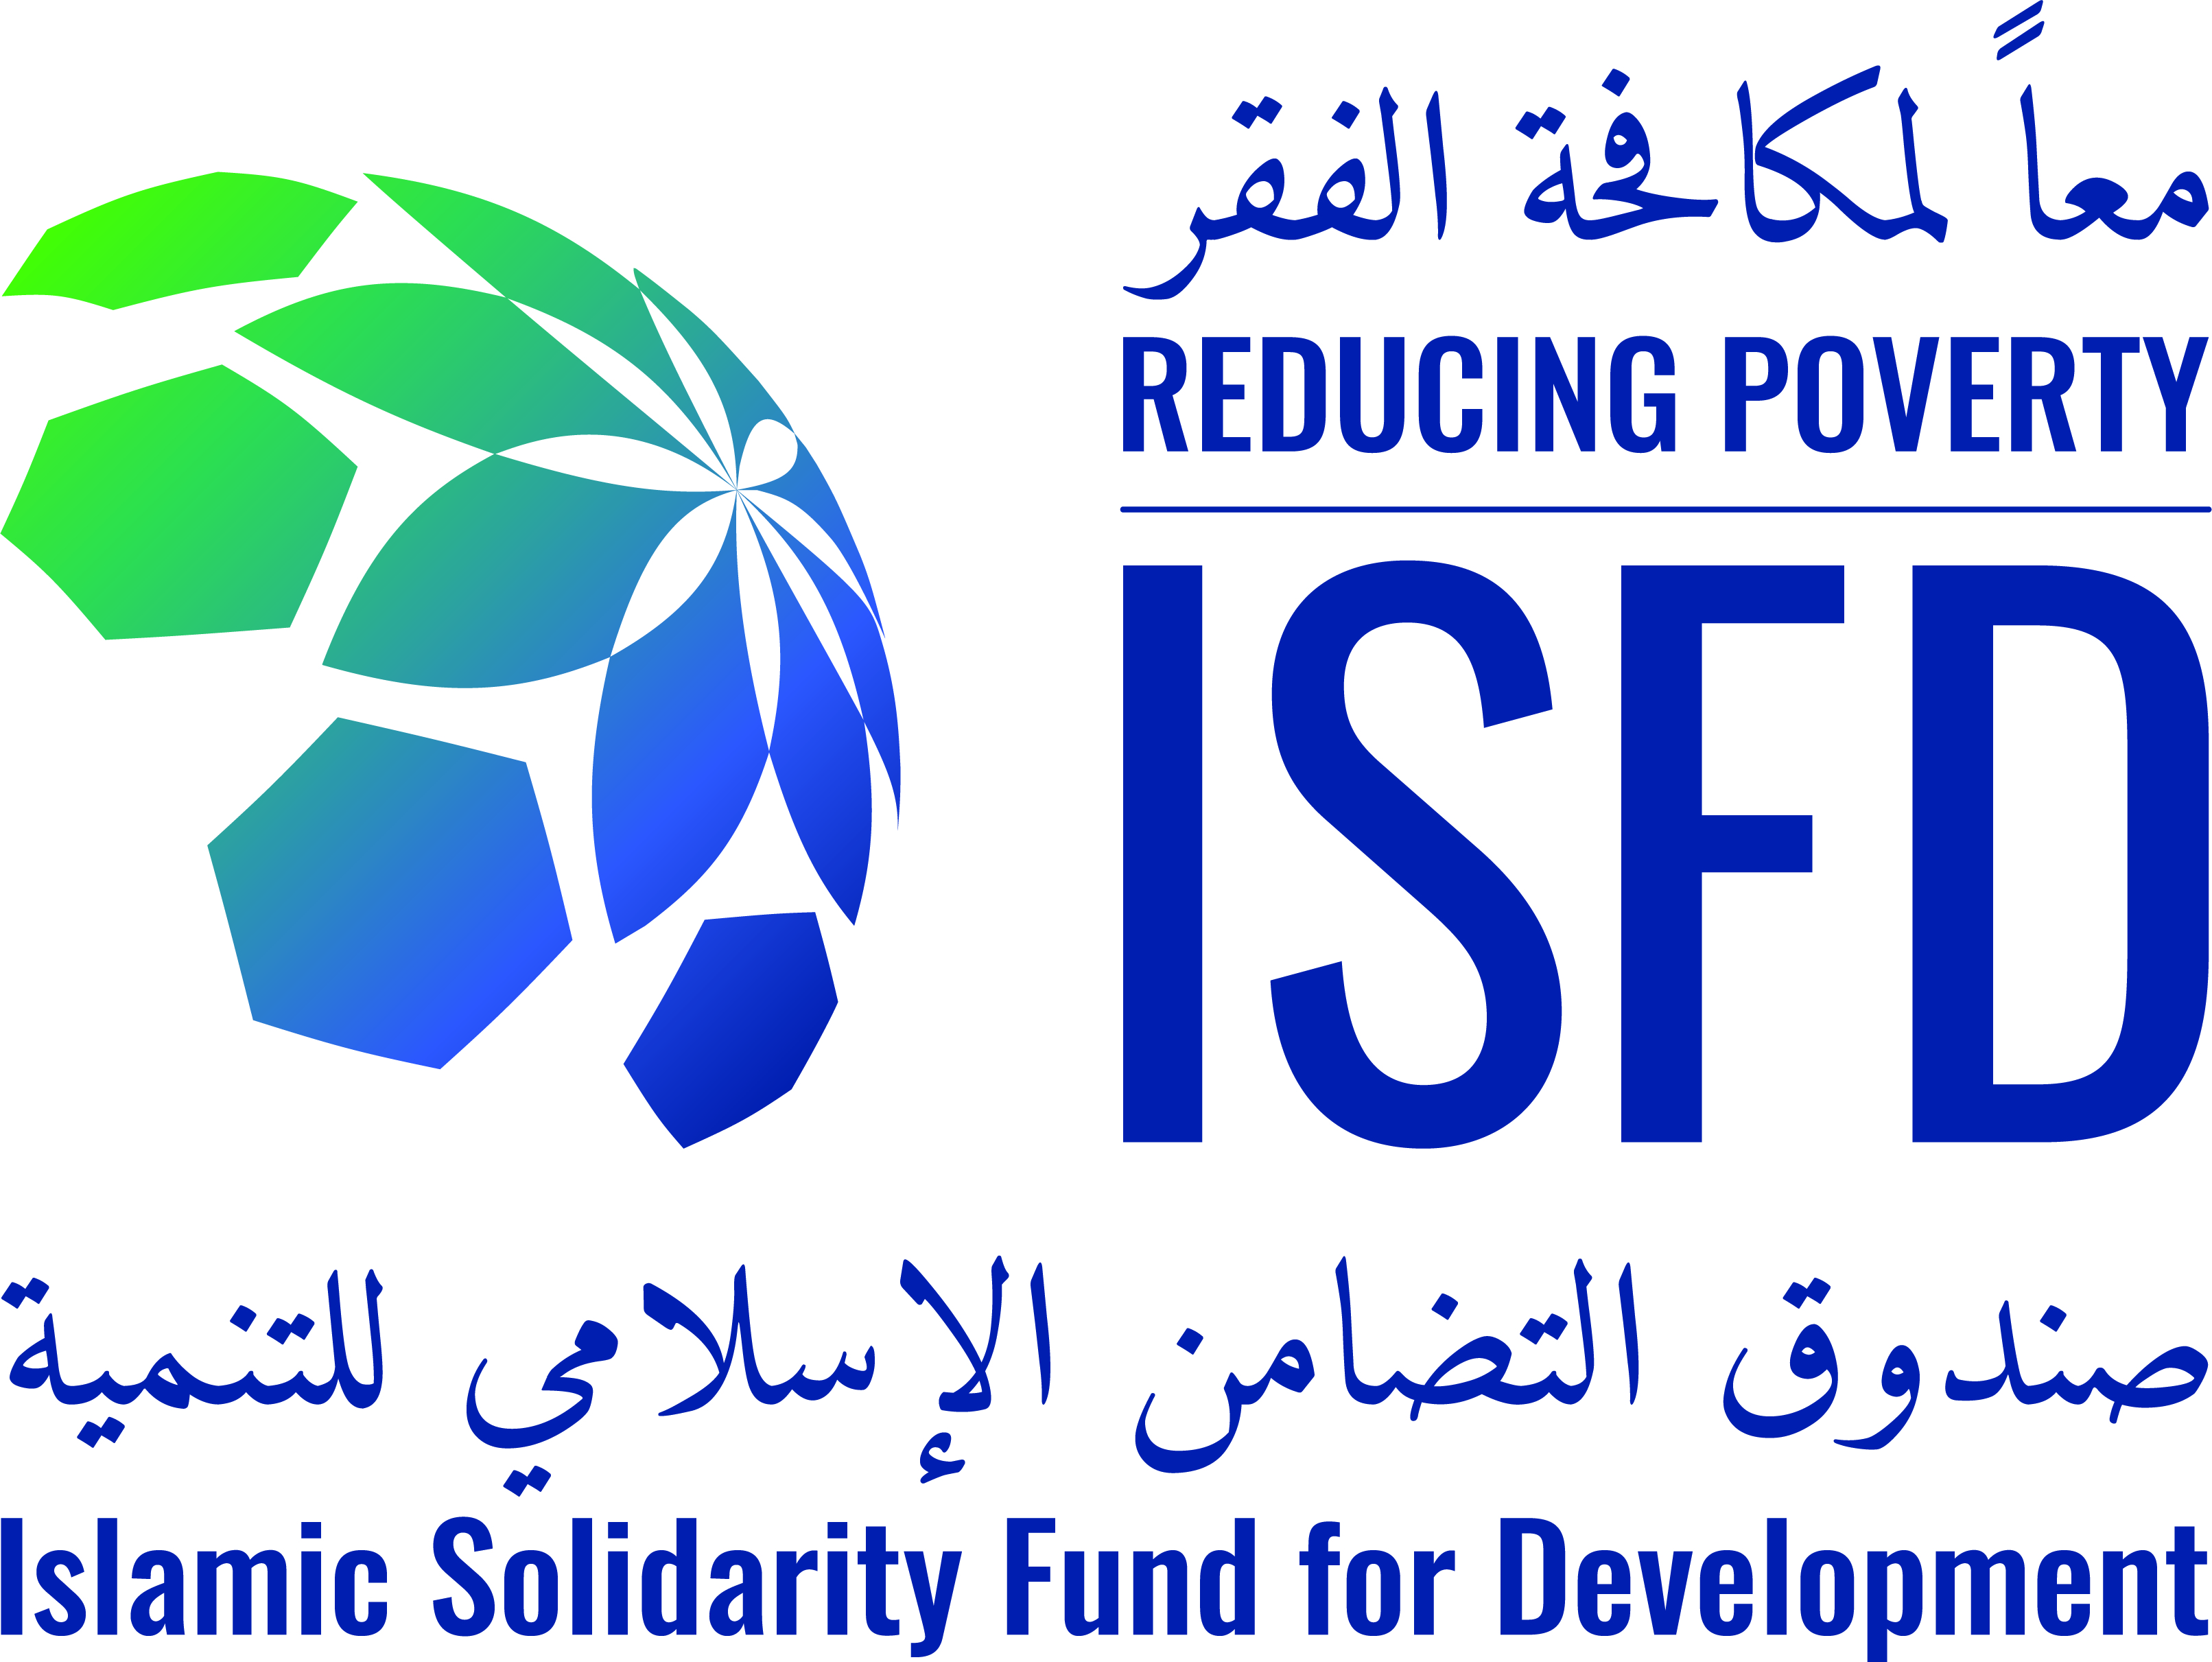 The Islamic Solidarity Fund for Development 